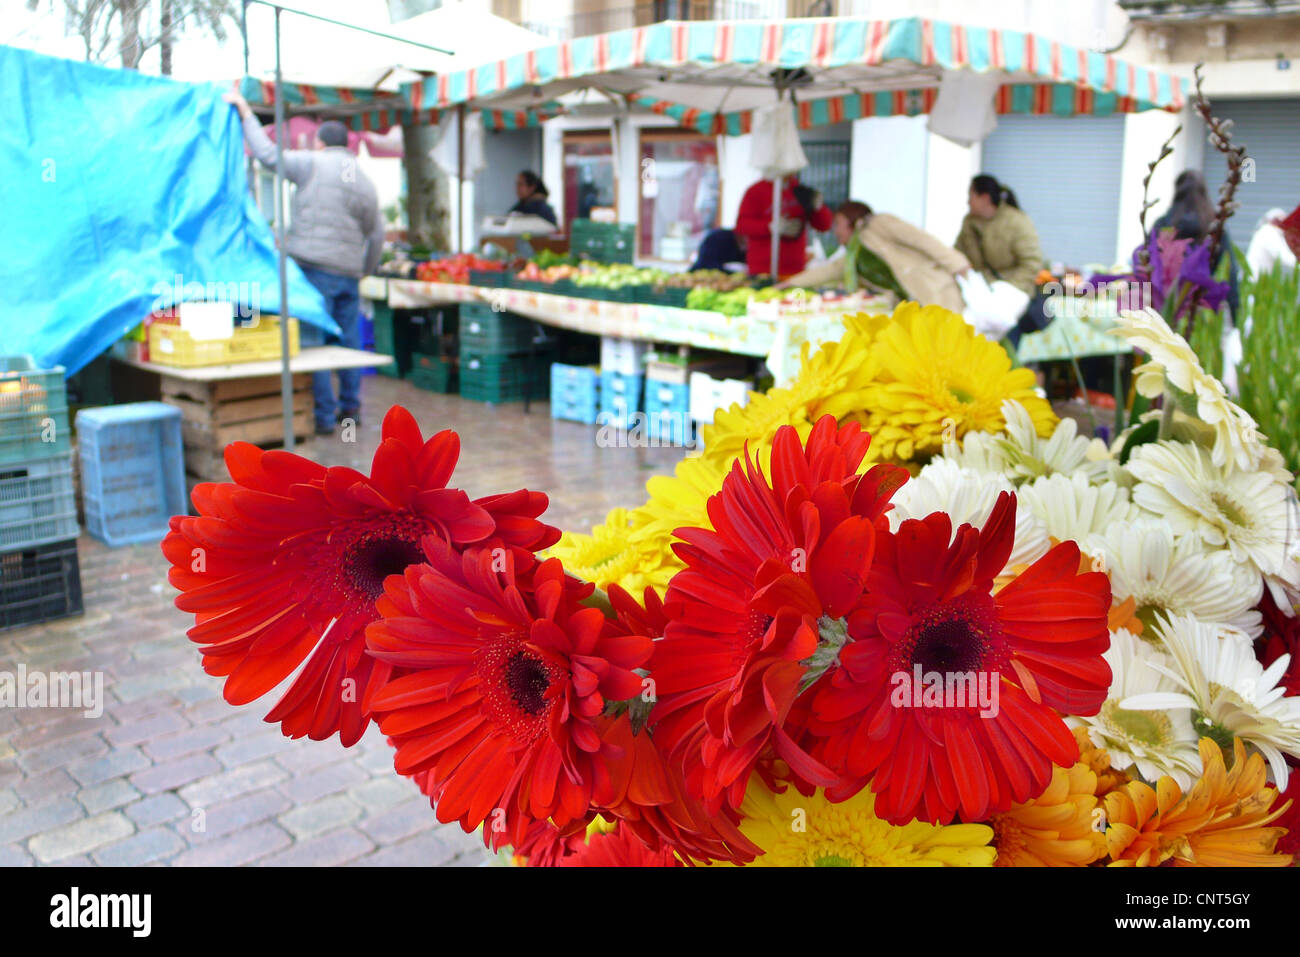 Booth Assistant High Resolution Stock Photography and Images - Alamy